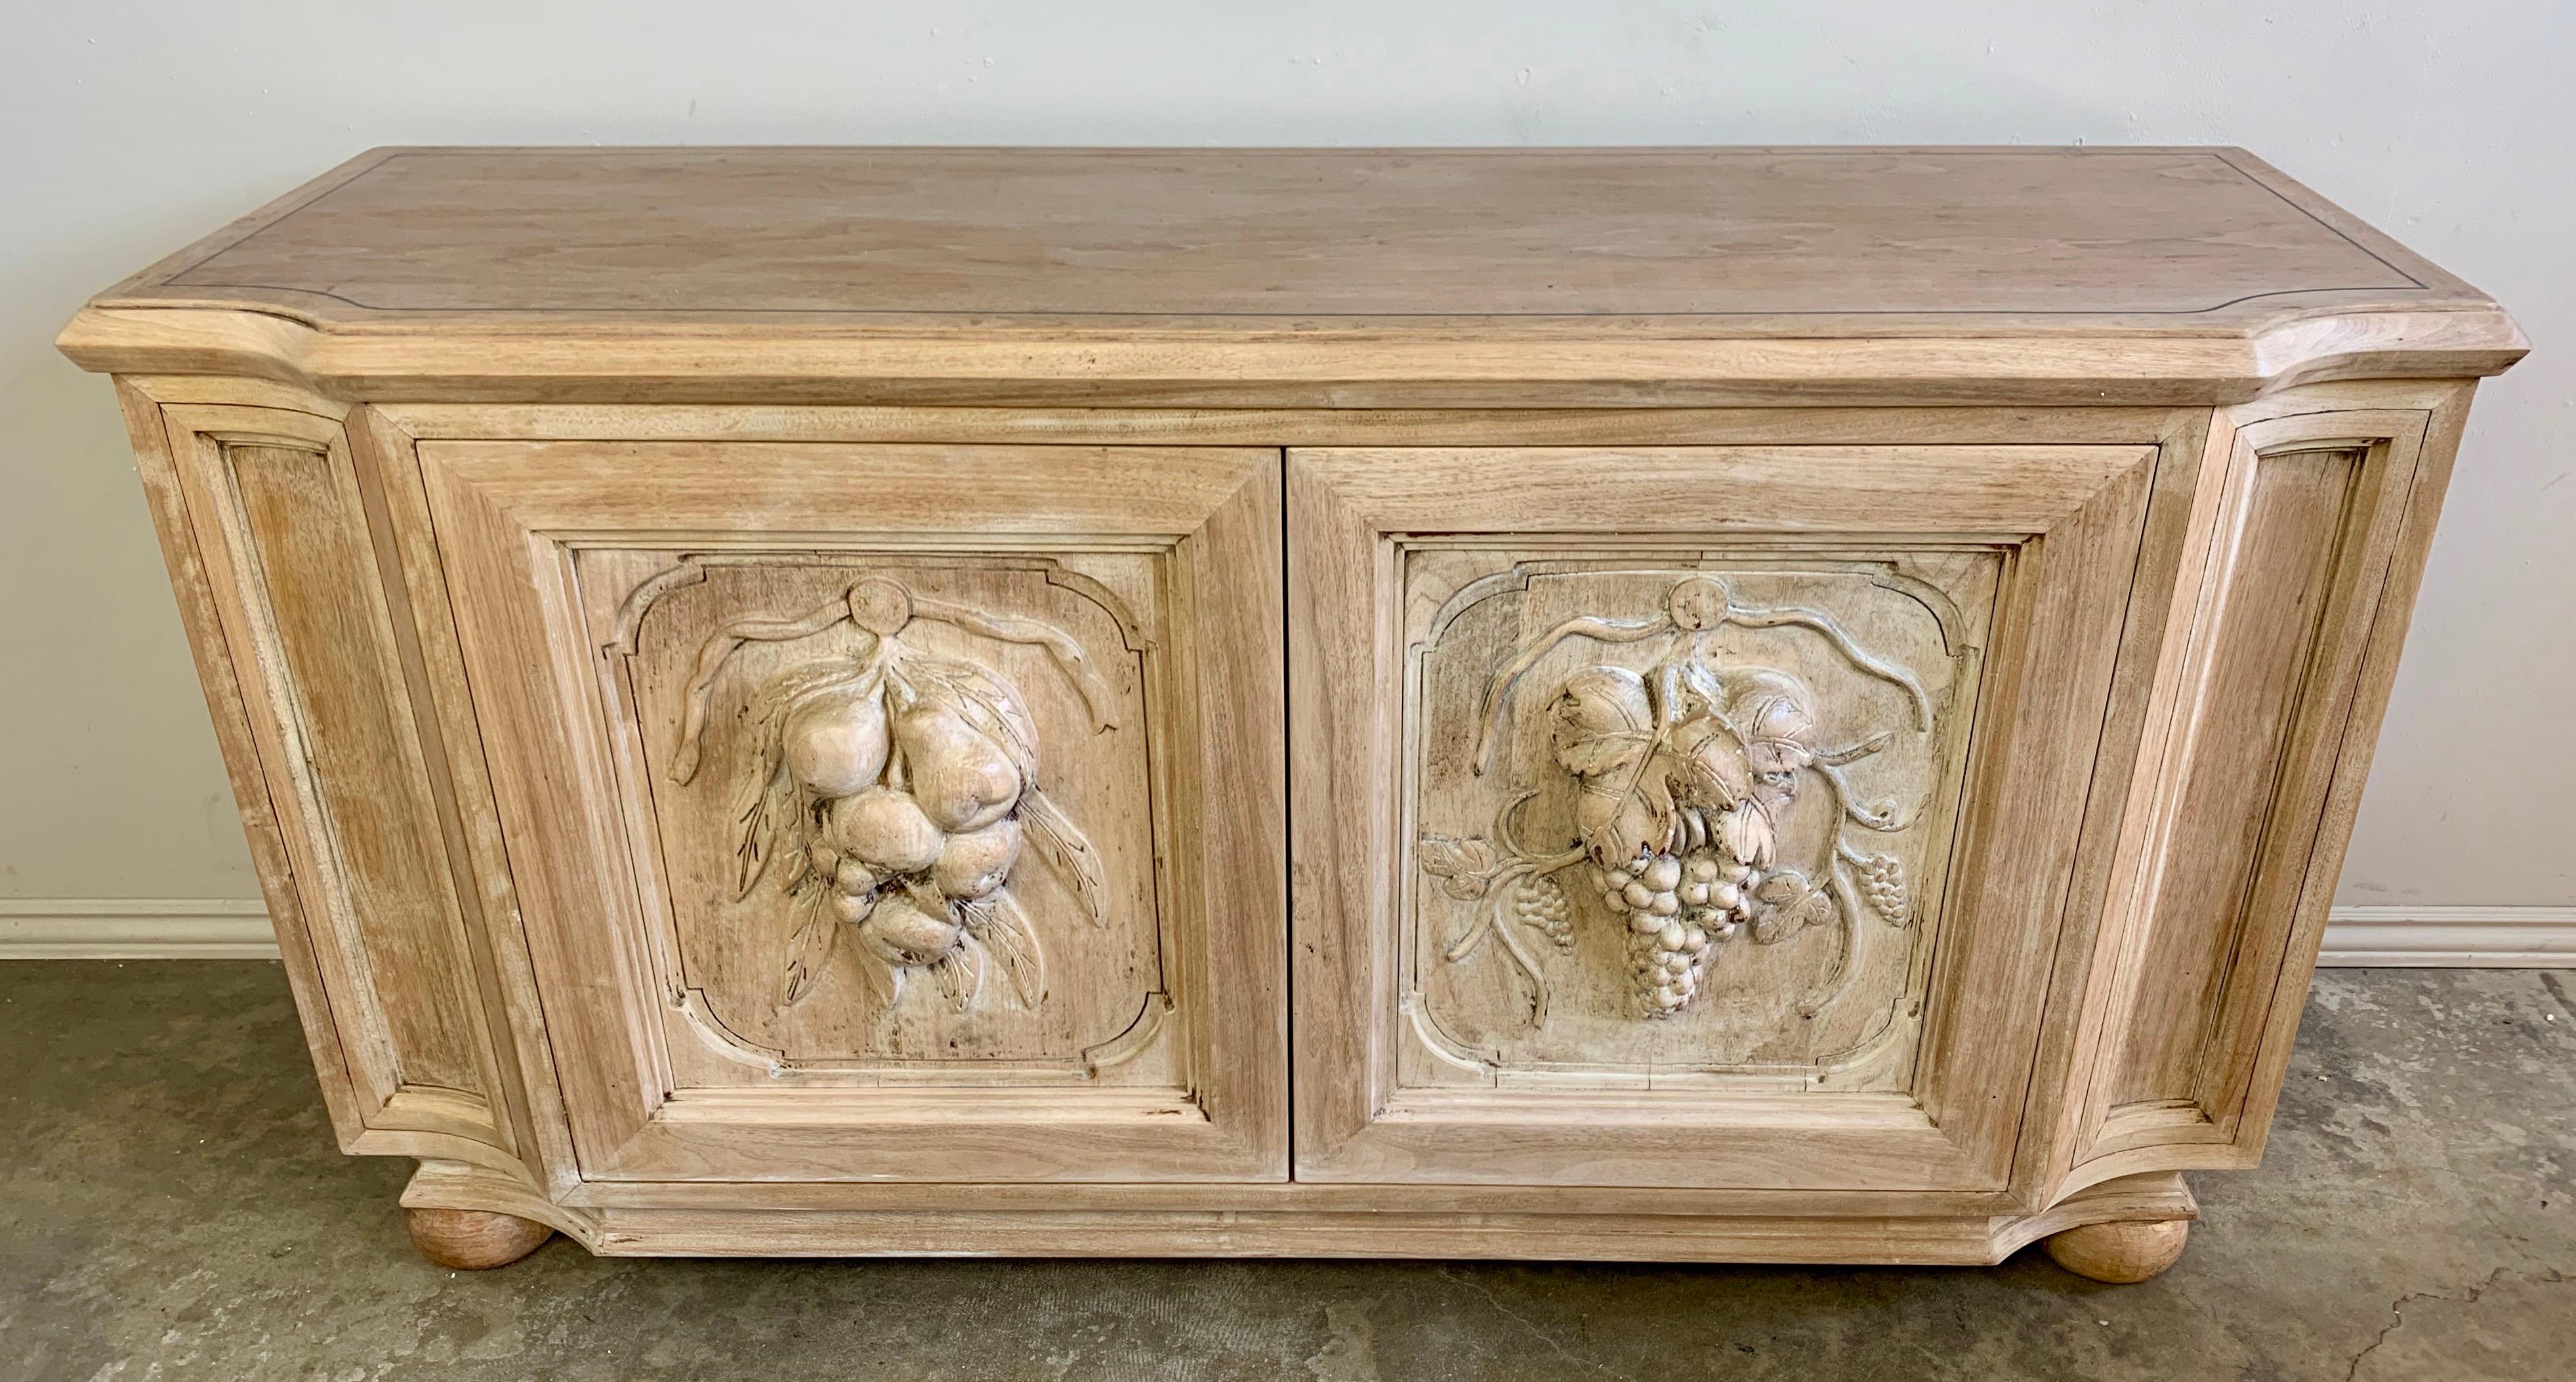 Beautiful Italian credenza in natural bleached walnut with detailed hand carved fruit panels on both doors.